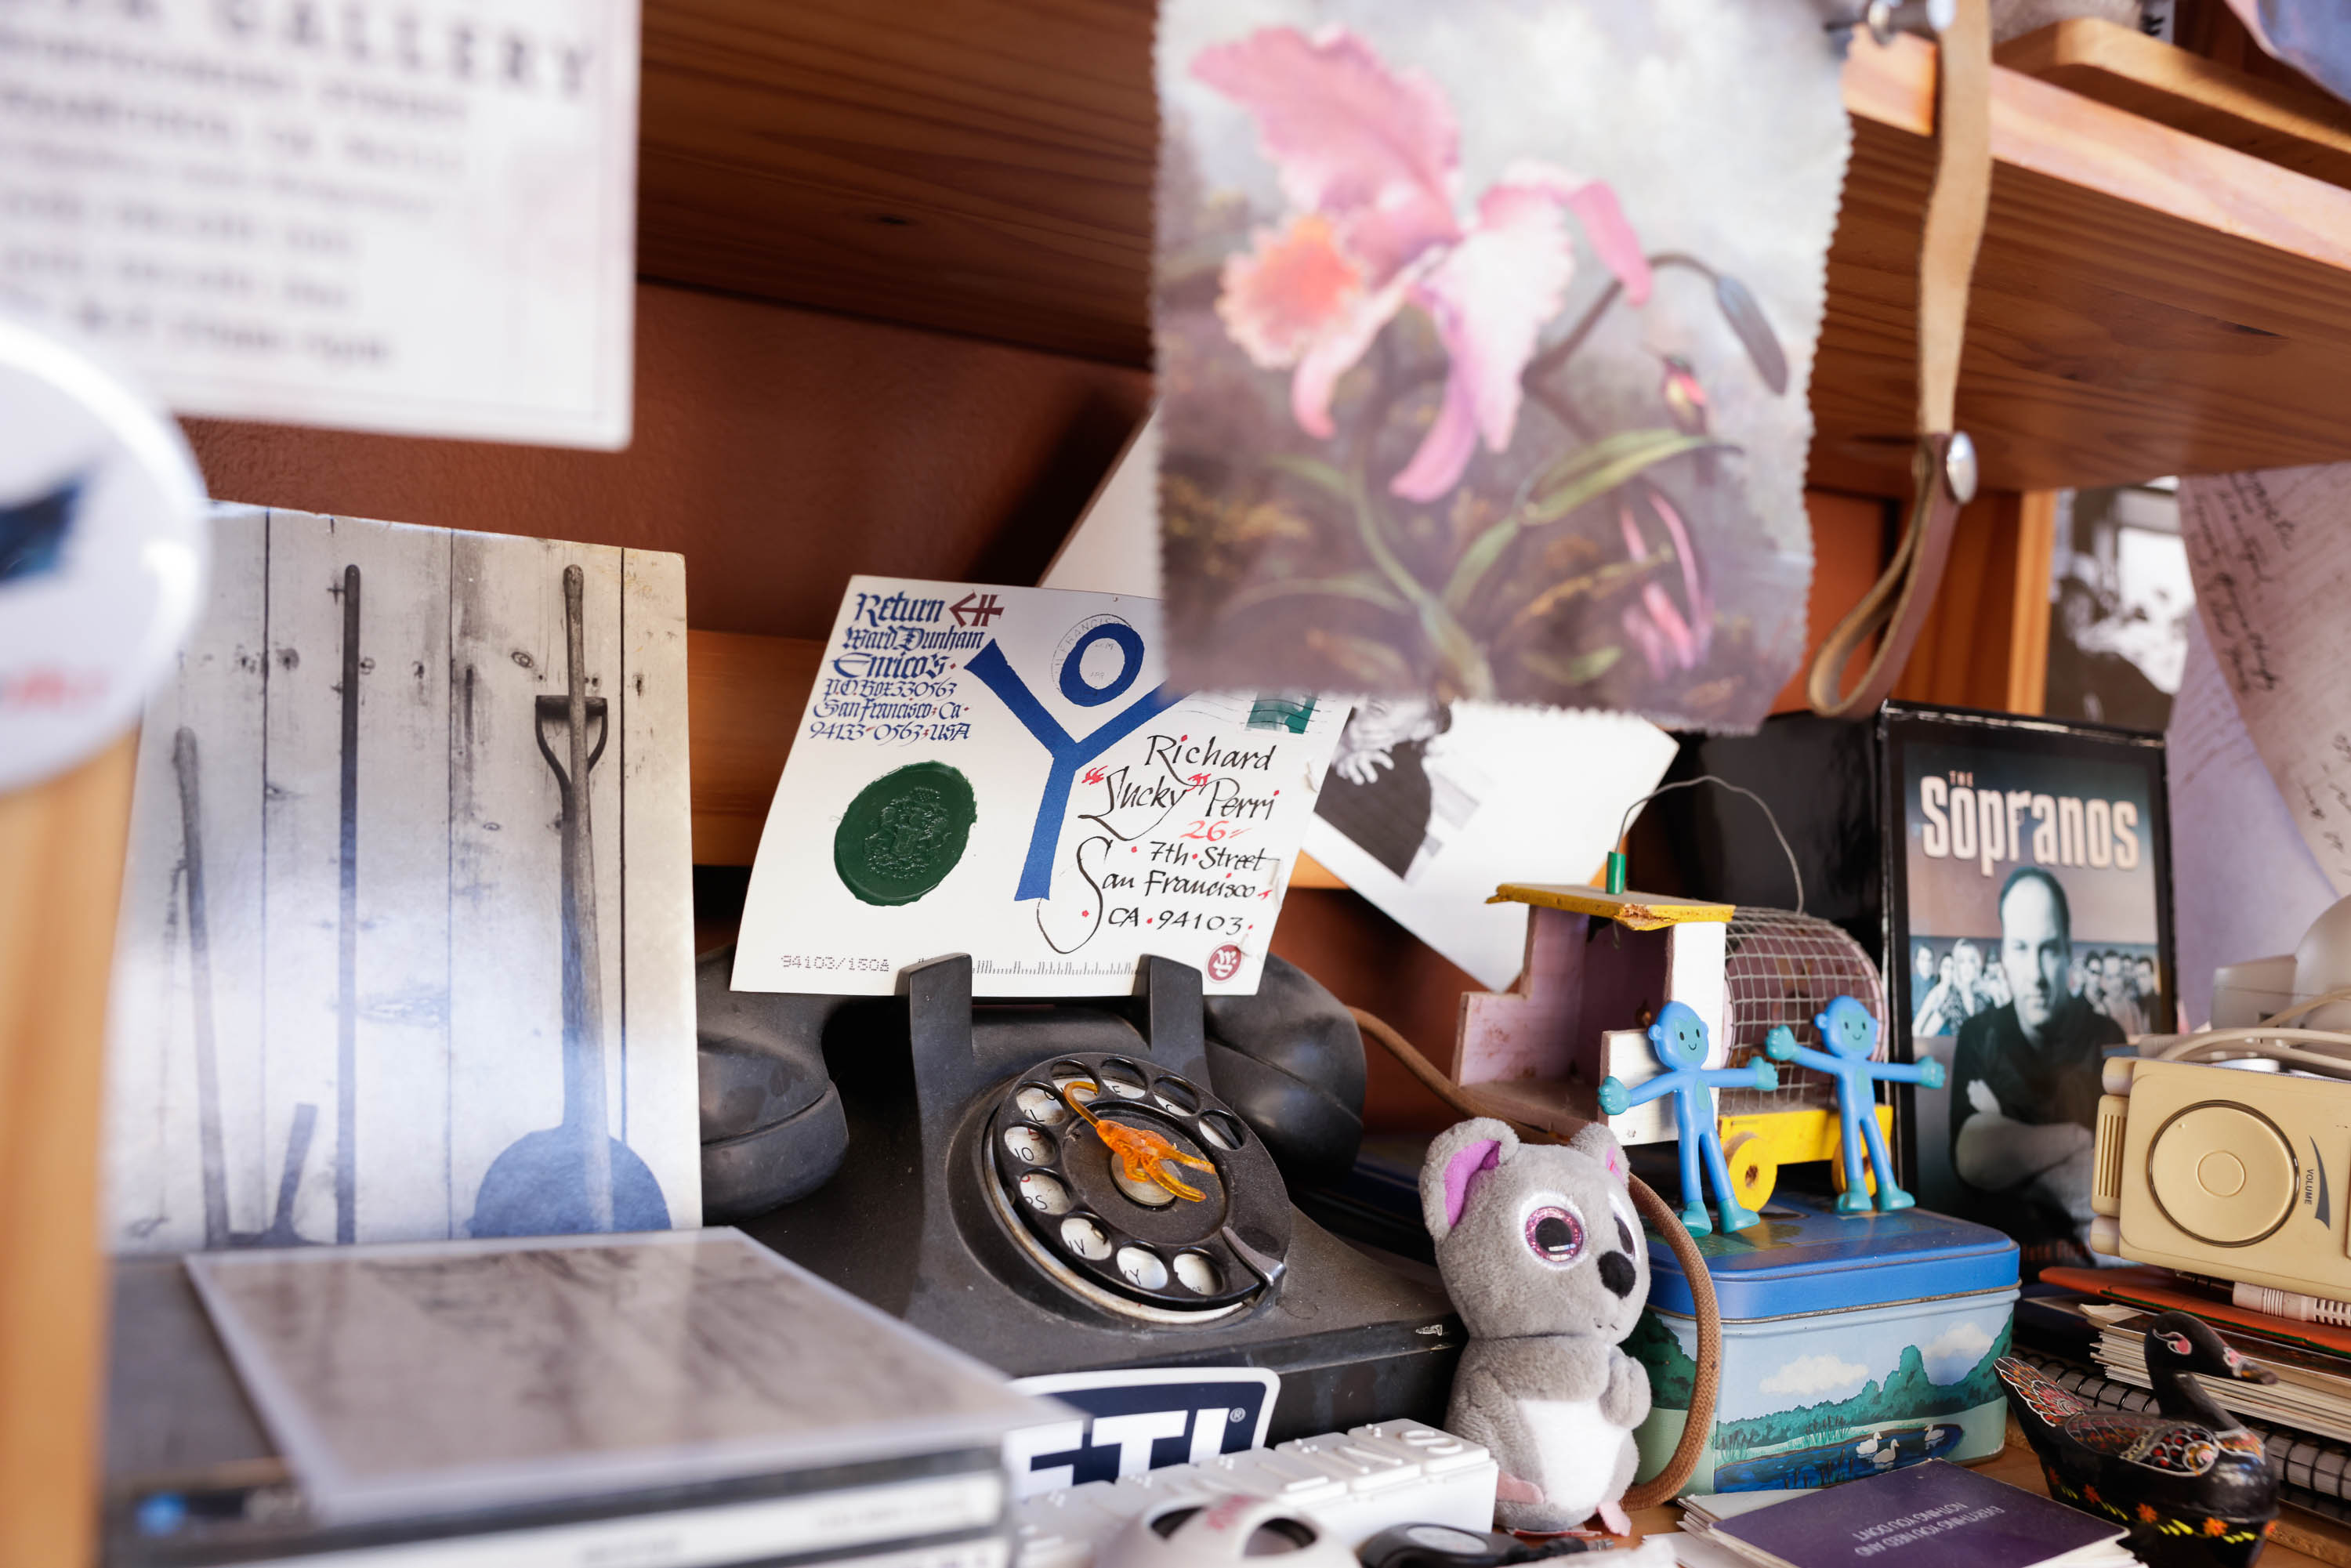 A cluttered shelf with a vintage phone, toys, a DVD box, and various memorabilia.